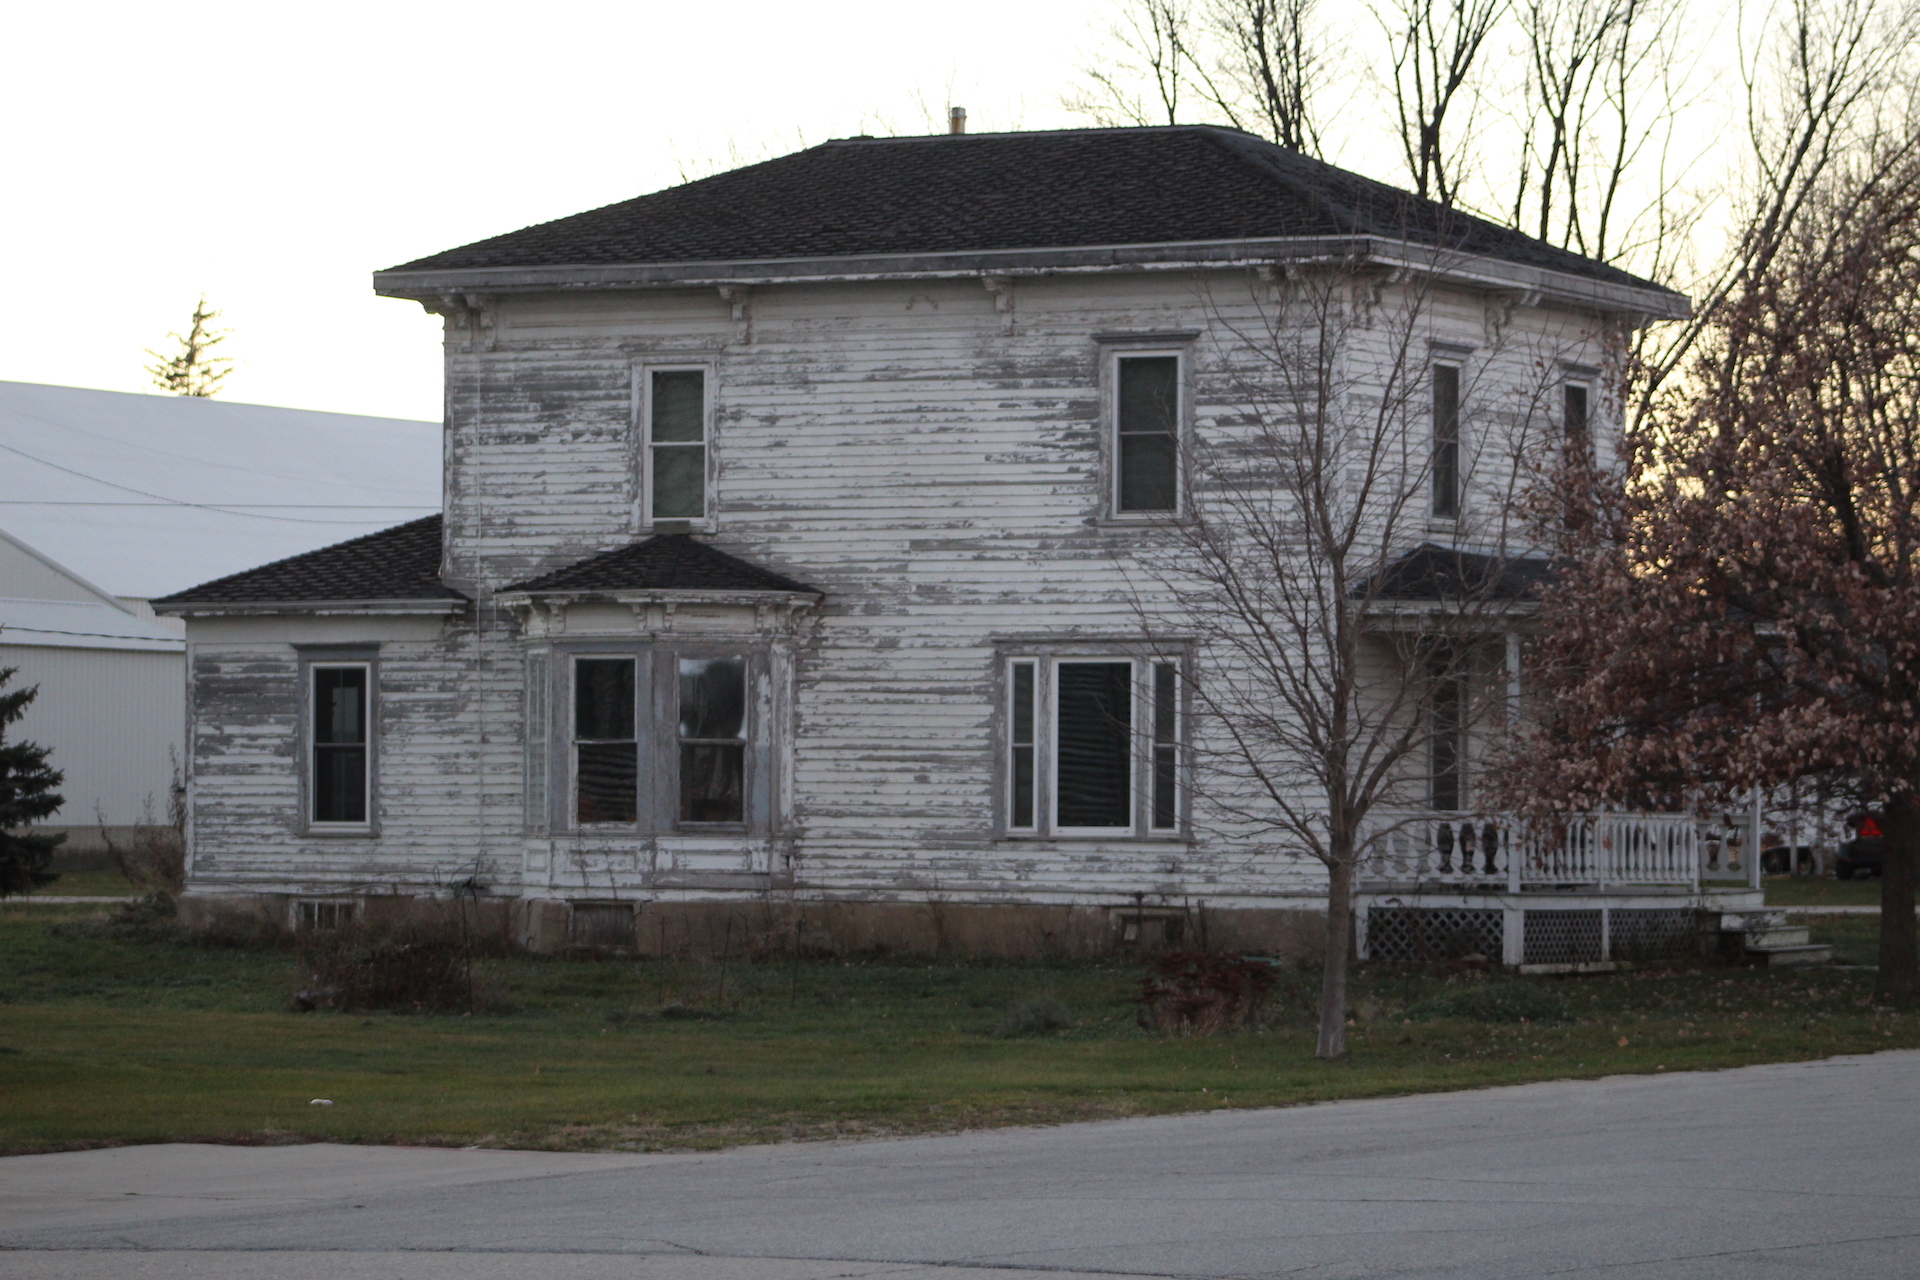 A beaten down house in Lime Springs, Iowa. Photo by Sabrina Johnkins.